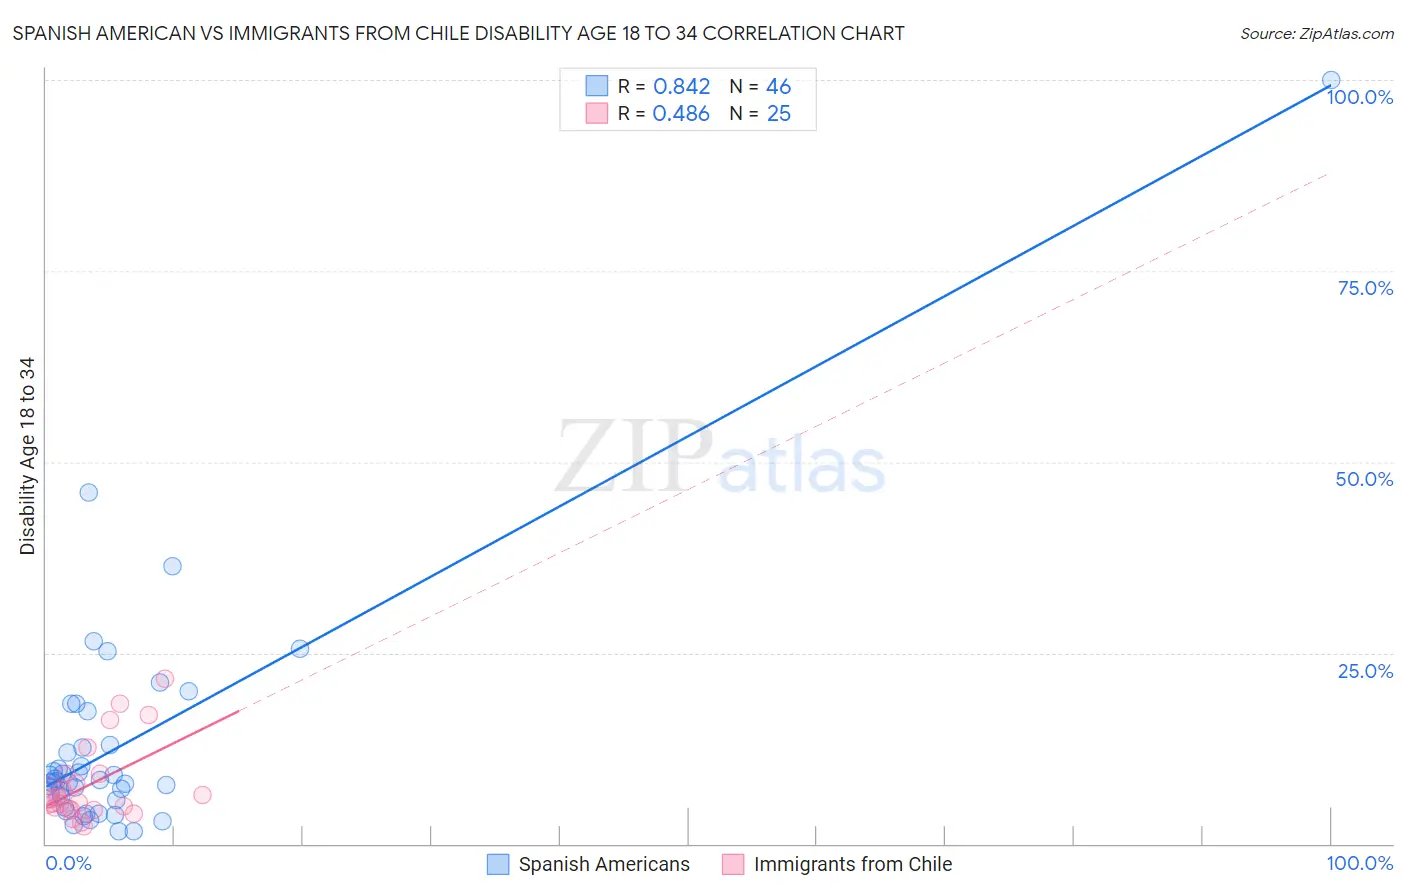 Spanish American vs Immigrants from Chile Disability Age 18 to 34